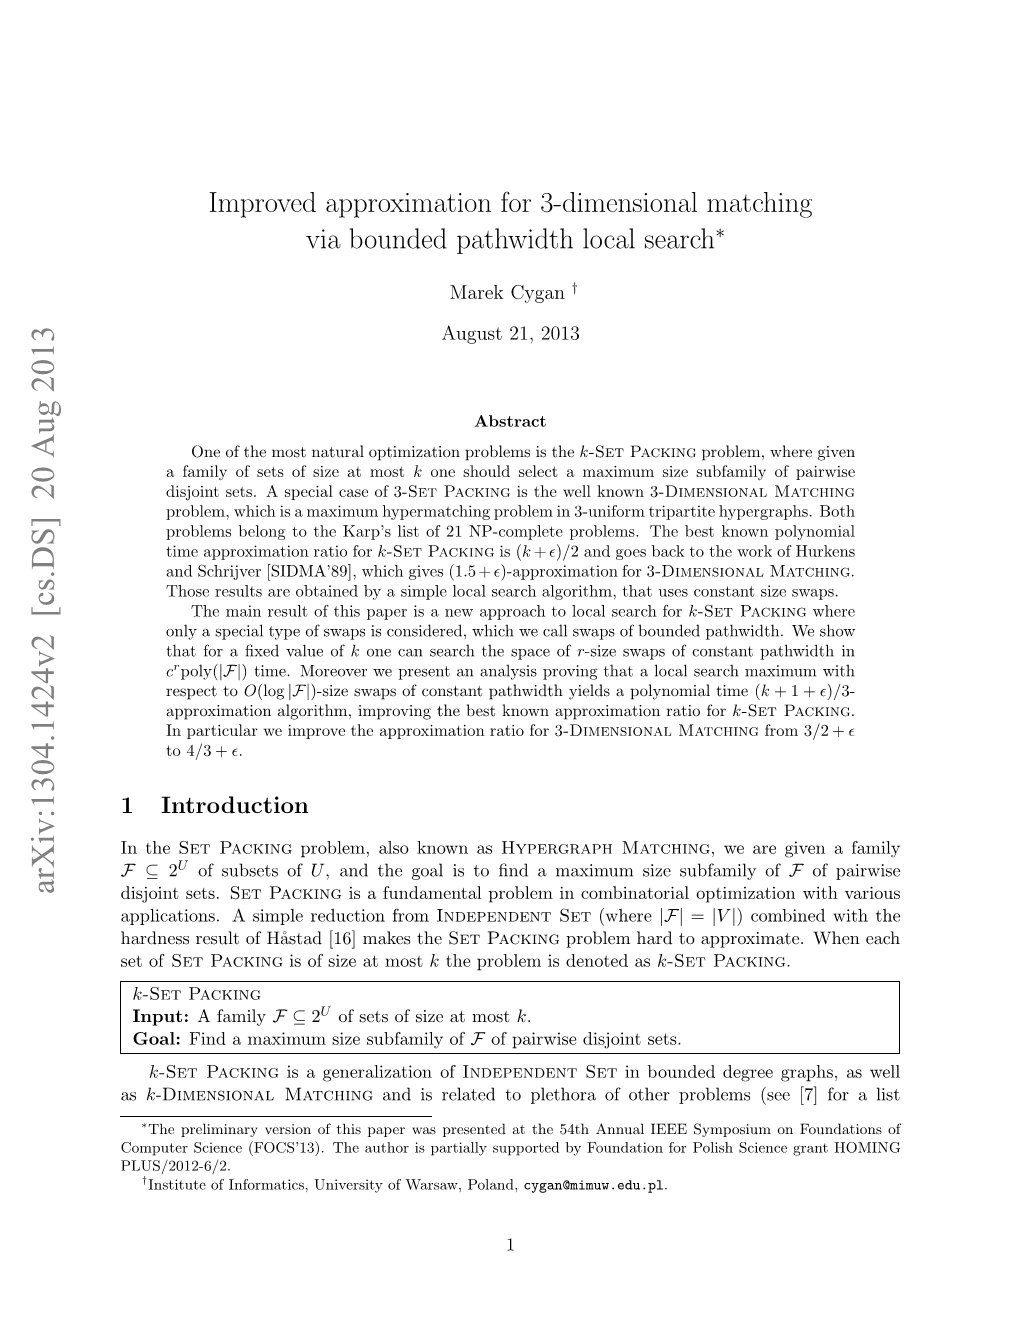 Improved Approximation for 3-Dimensional Matching Via